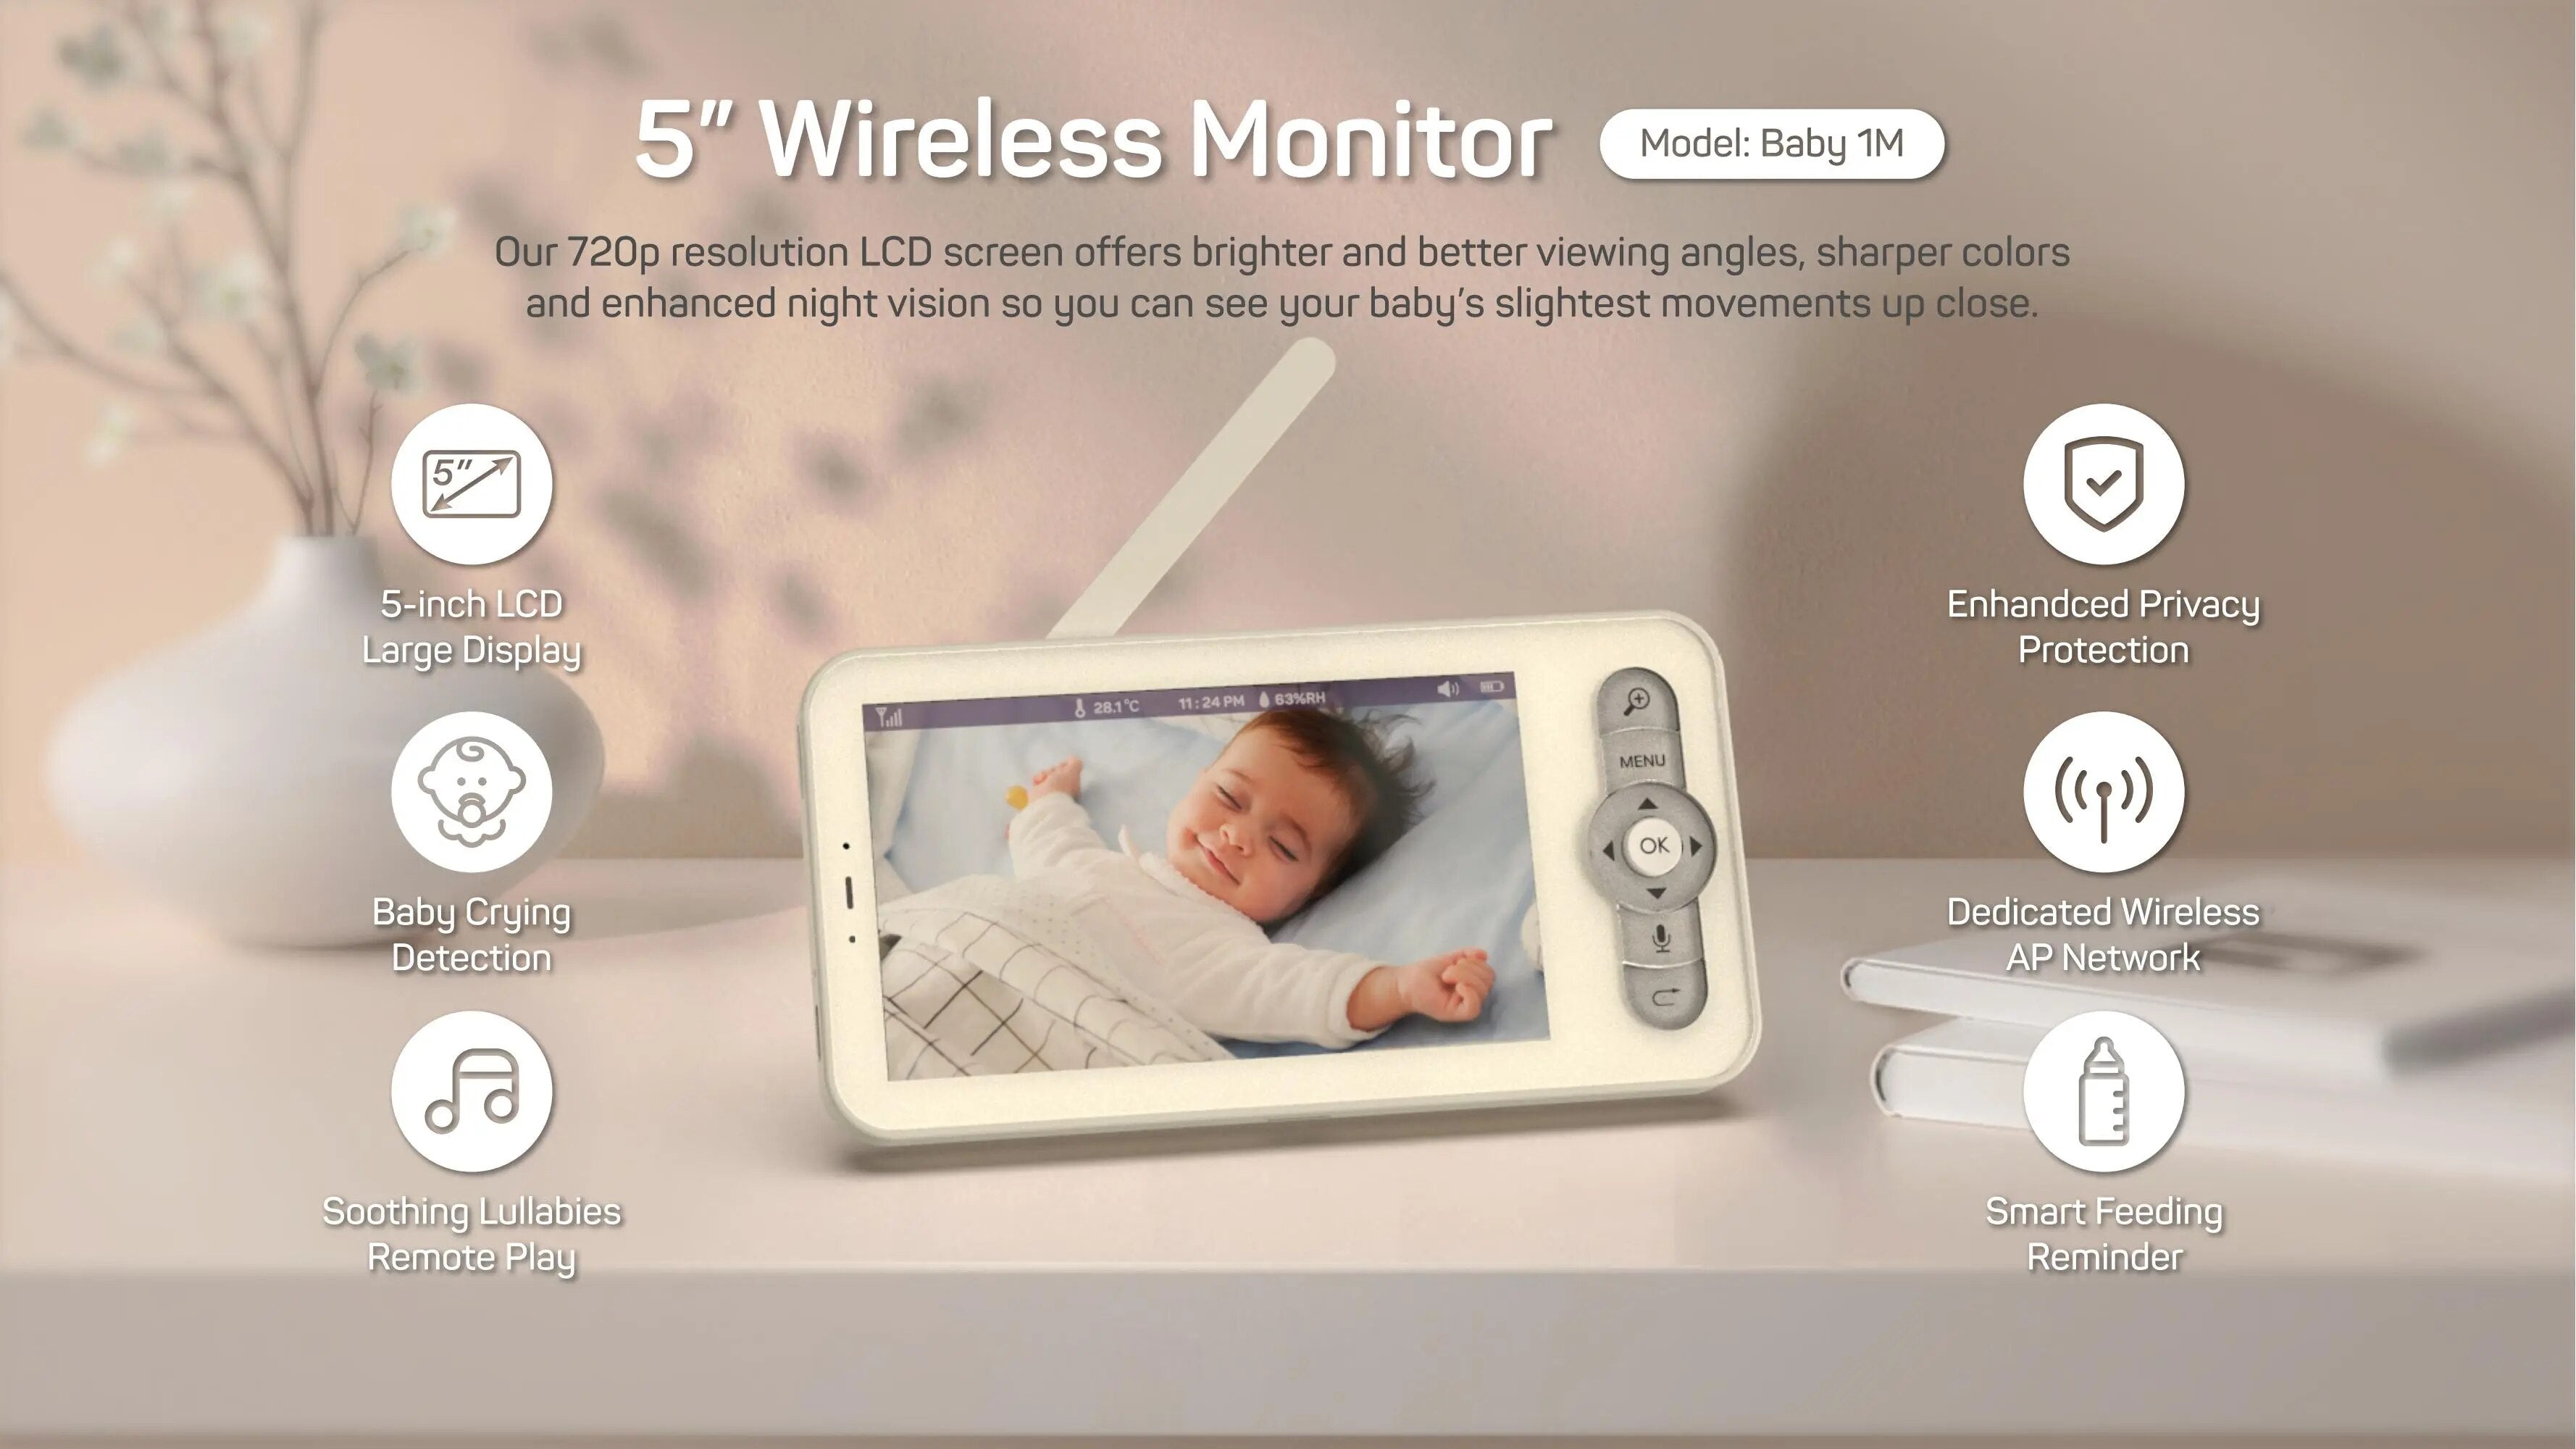 NEW 5" Video Baby Monitor 2.4GH WiFi 1080P Camera NightVision Motion and Sound Notifications Humidity Support Phone App Control